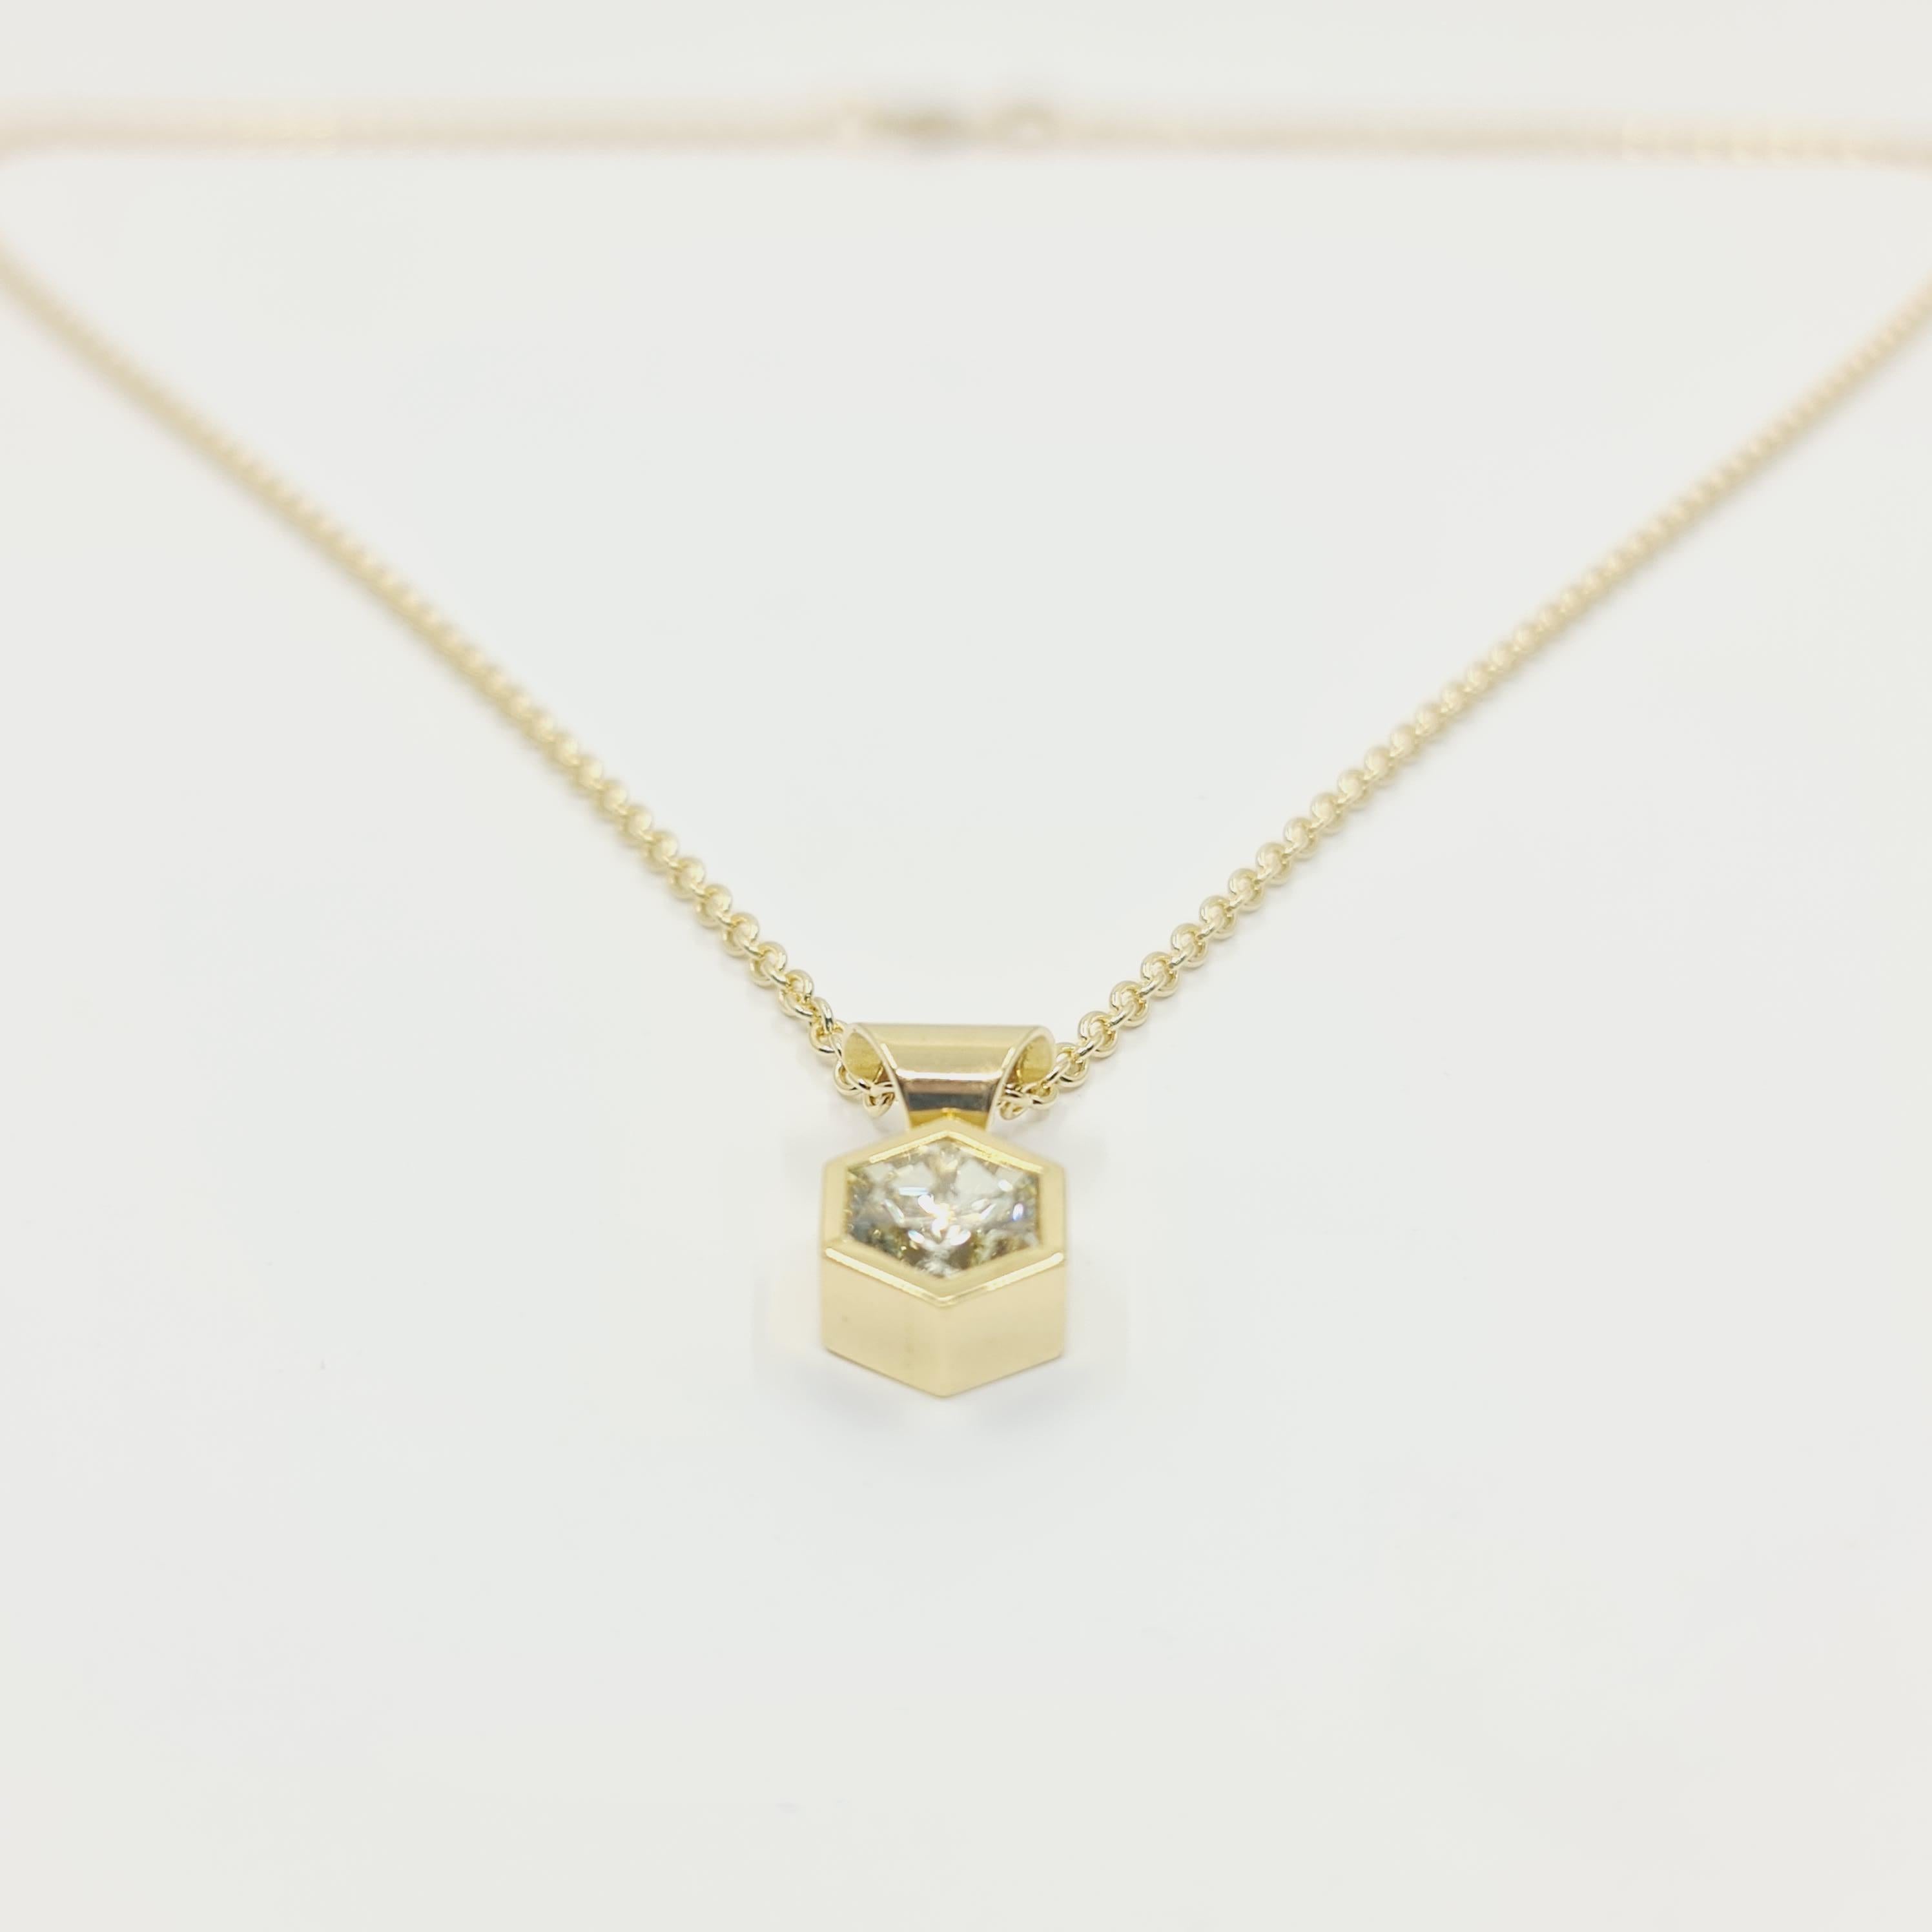 HRD Certified 2.00 Ct. Diamond Necklace 750 Gold with Rare Hexagon Cut Diamond For Sale 6